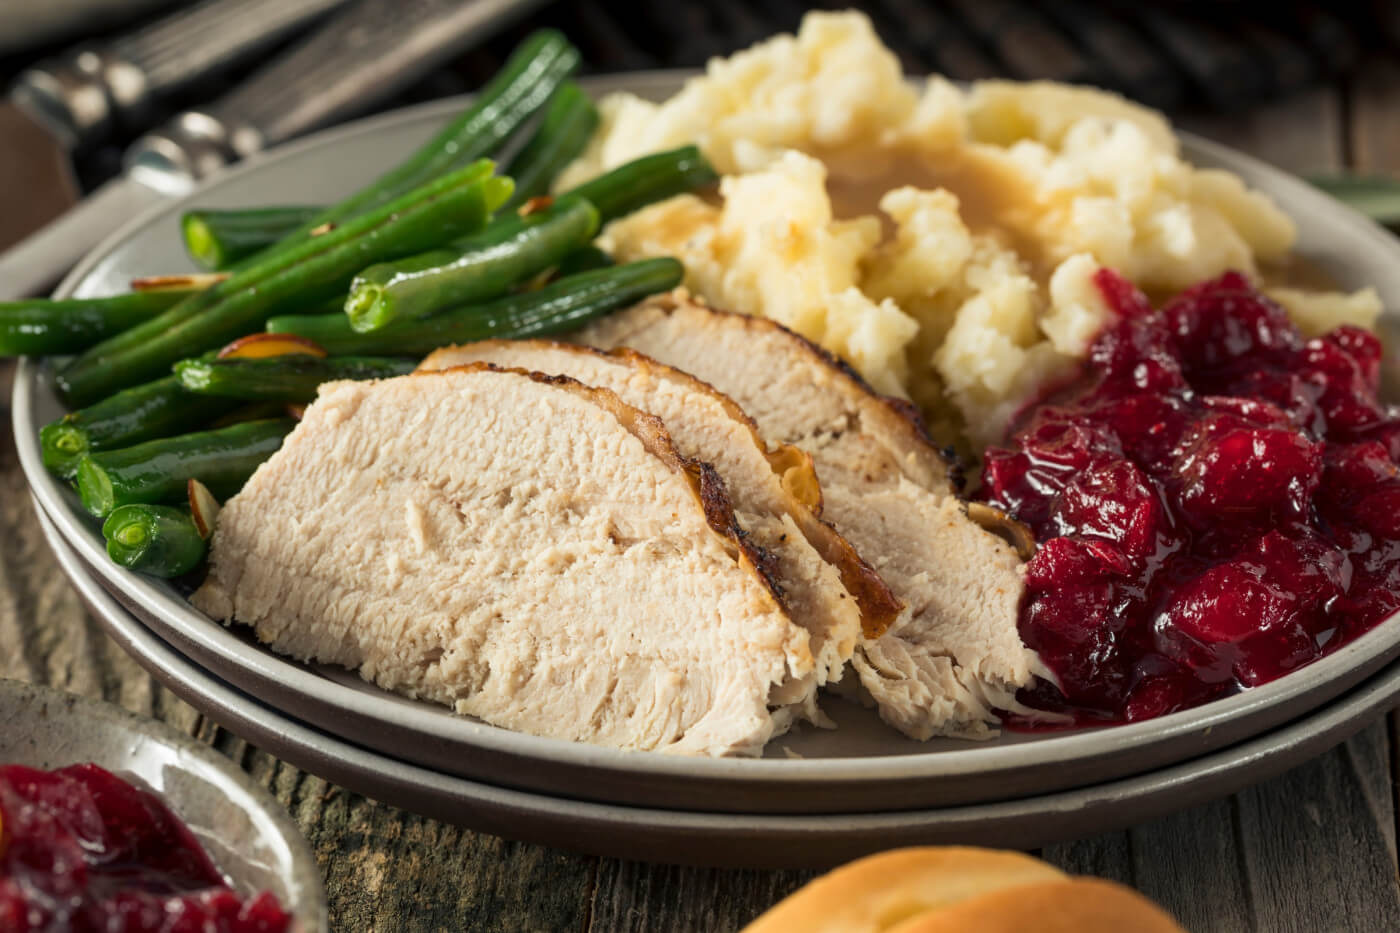 Plate of Thanksgiving food | Healthy Eating after Bariatric Surgery